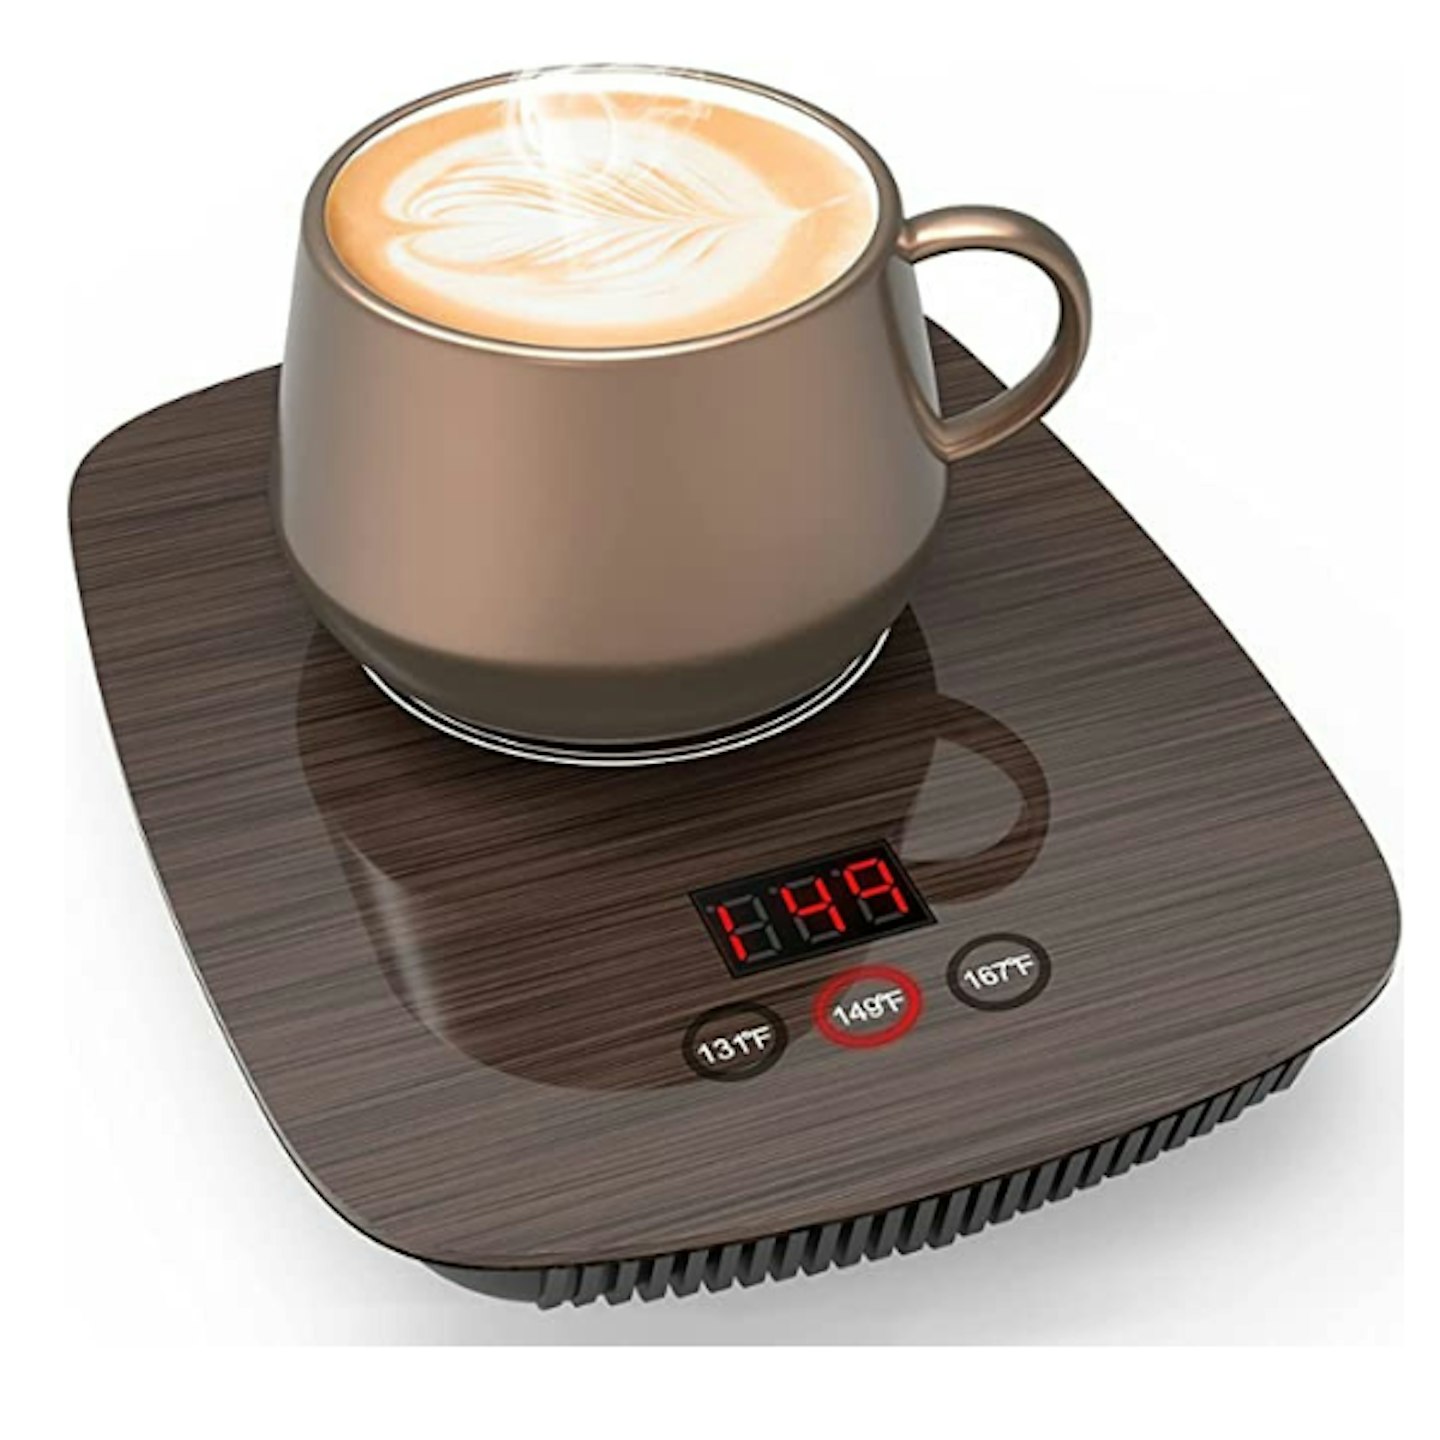 VOBAGA Cup Warmer review - Keep your cuppa coffee or tea warmer